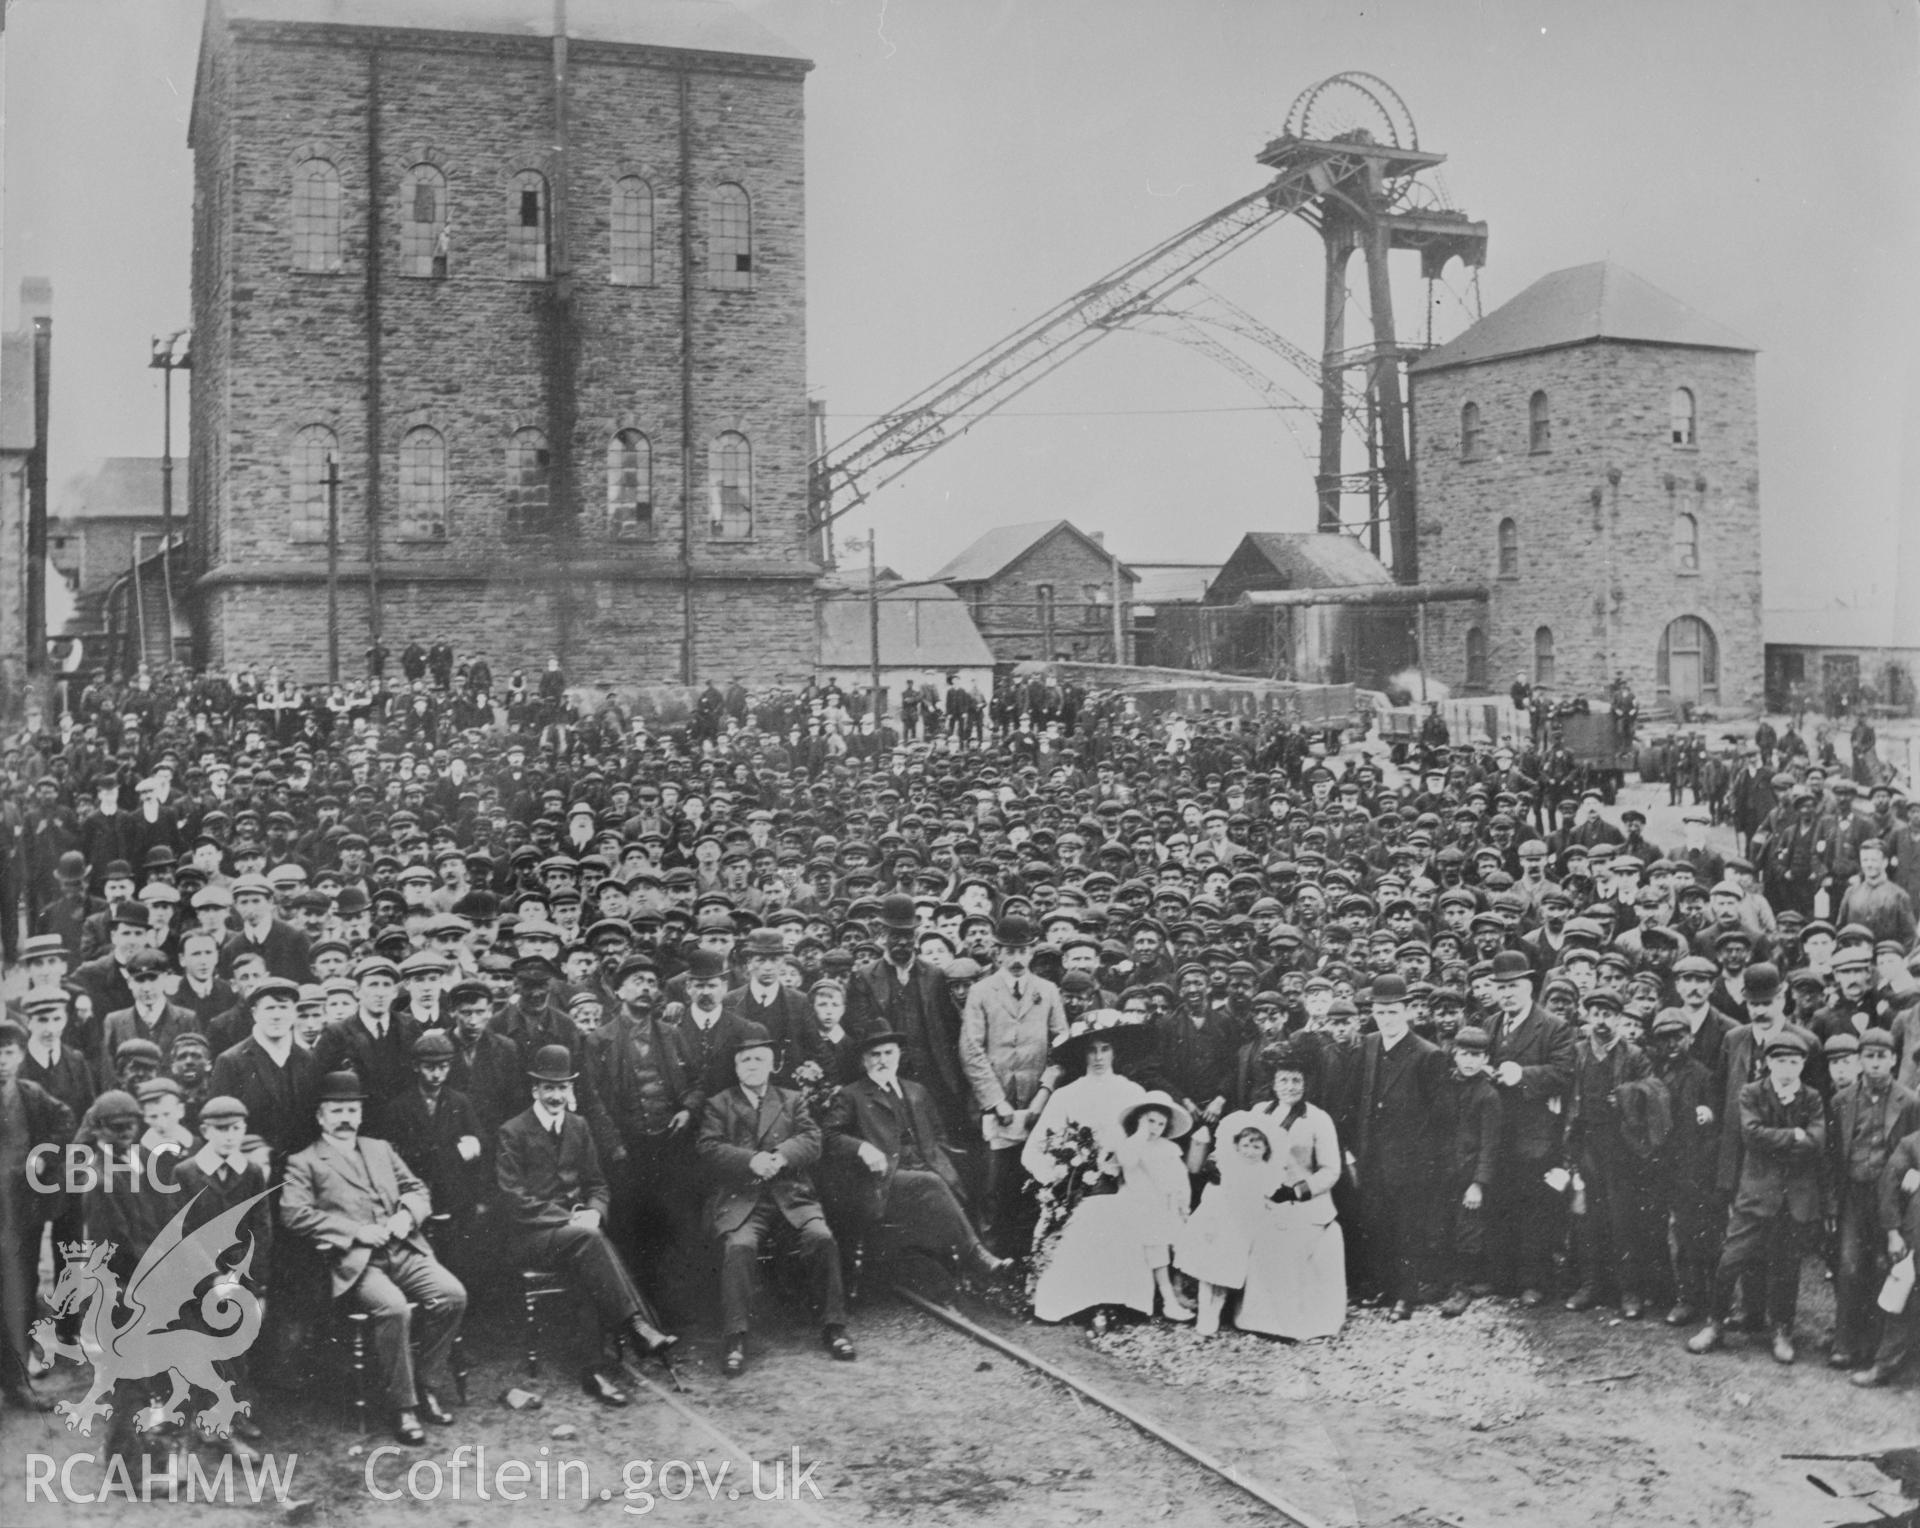 Digital copy of an acetate negative showing large group of miners and colliery officials at Ocean Deep Navigation Colliery, from the John Cornwell Collection.